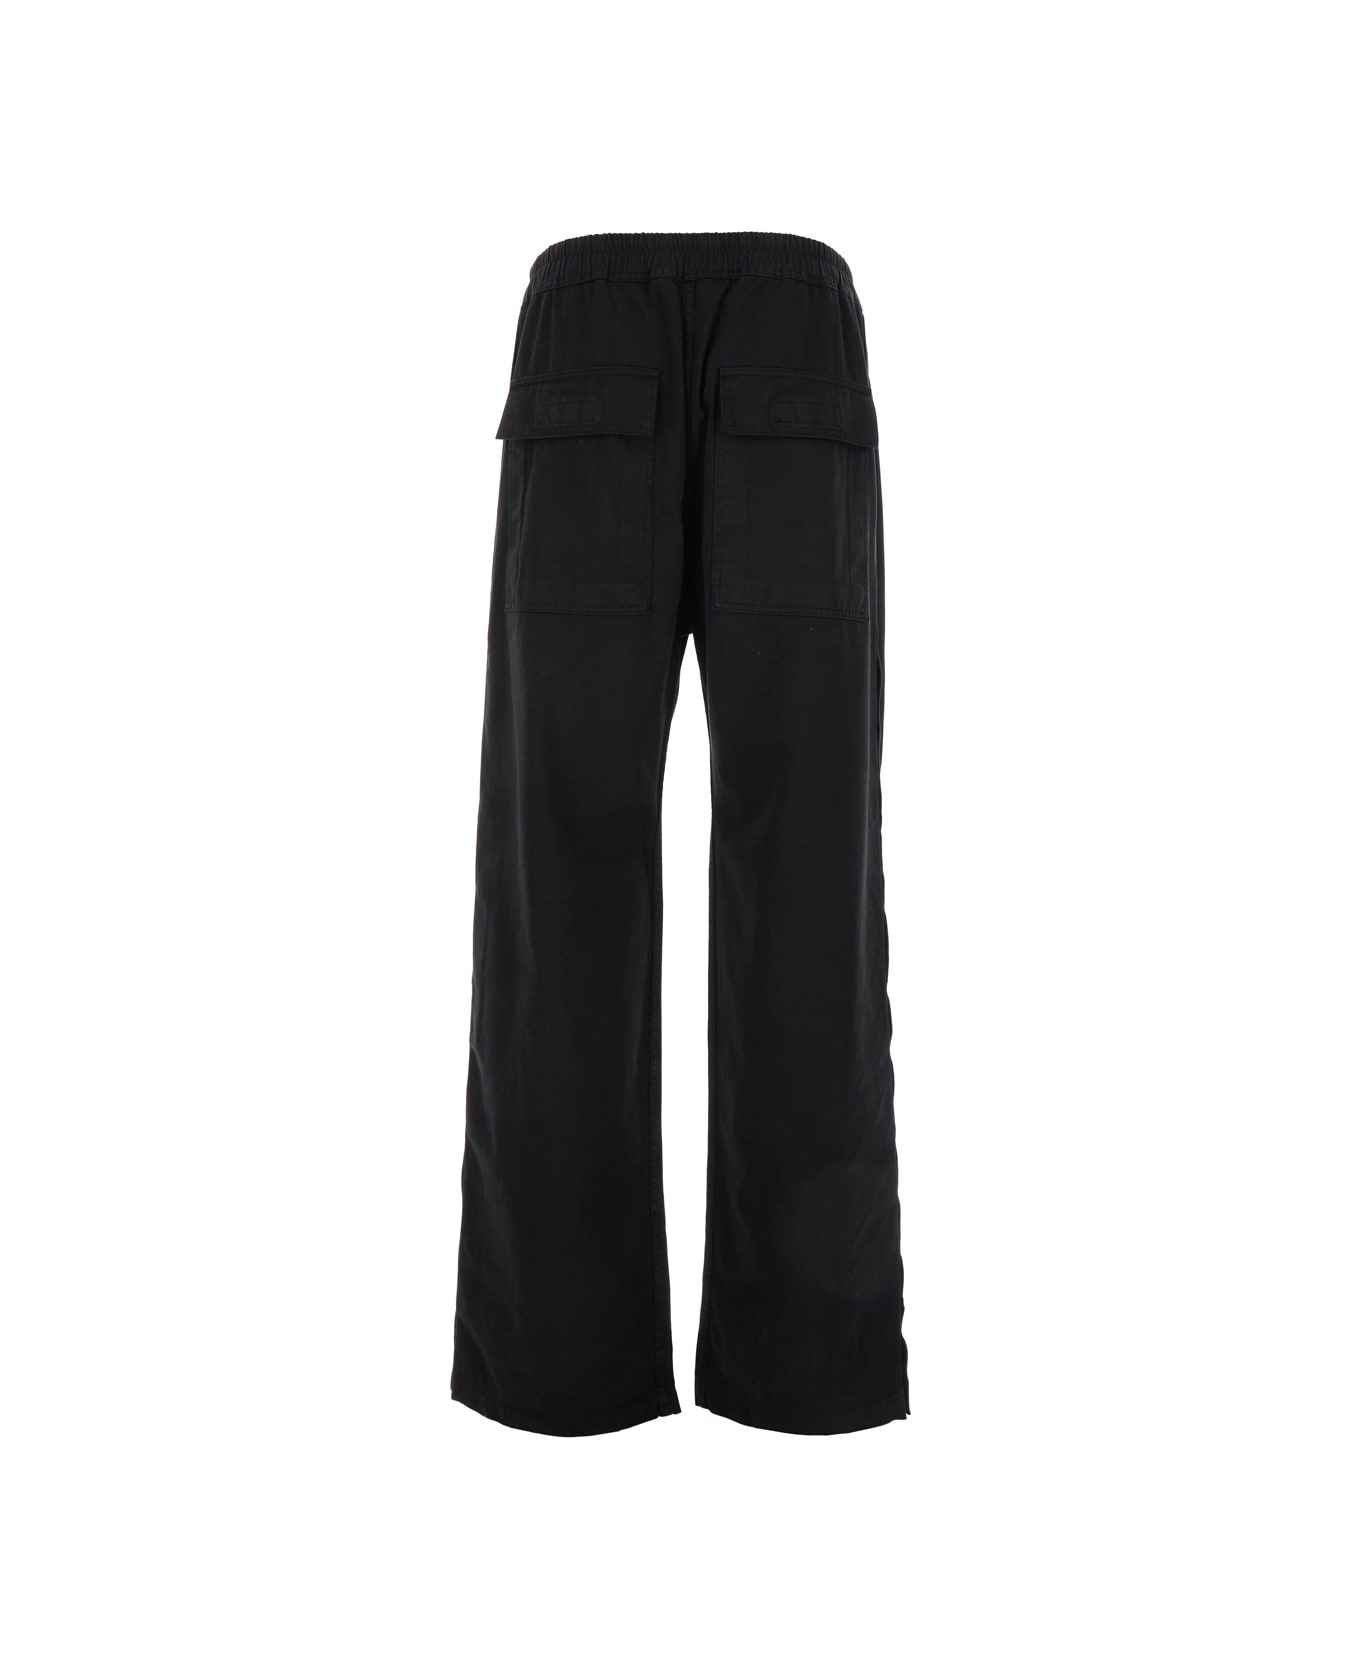 DRKSHDW Black Pants With Snap Buttons And Drawstring In Cotton Man - Black